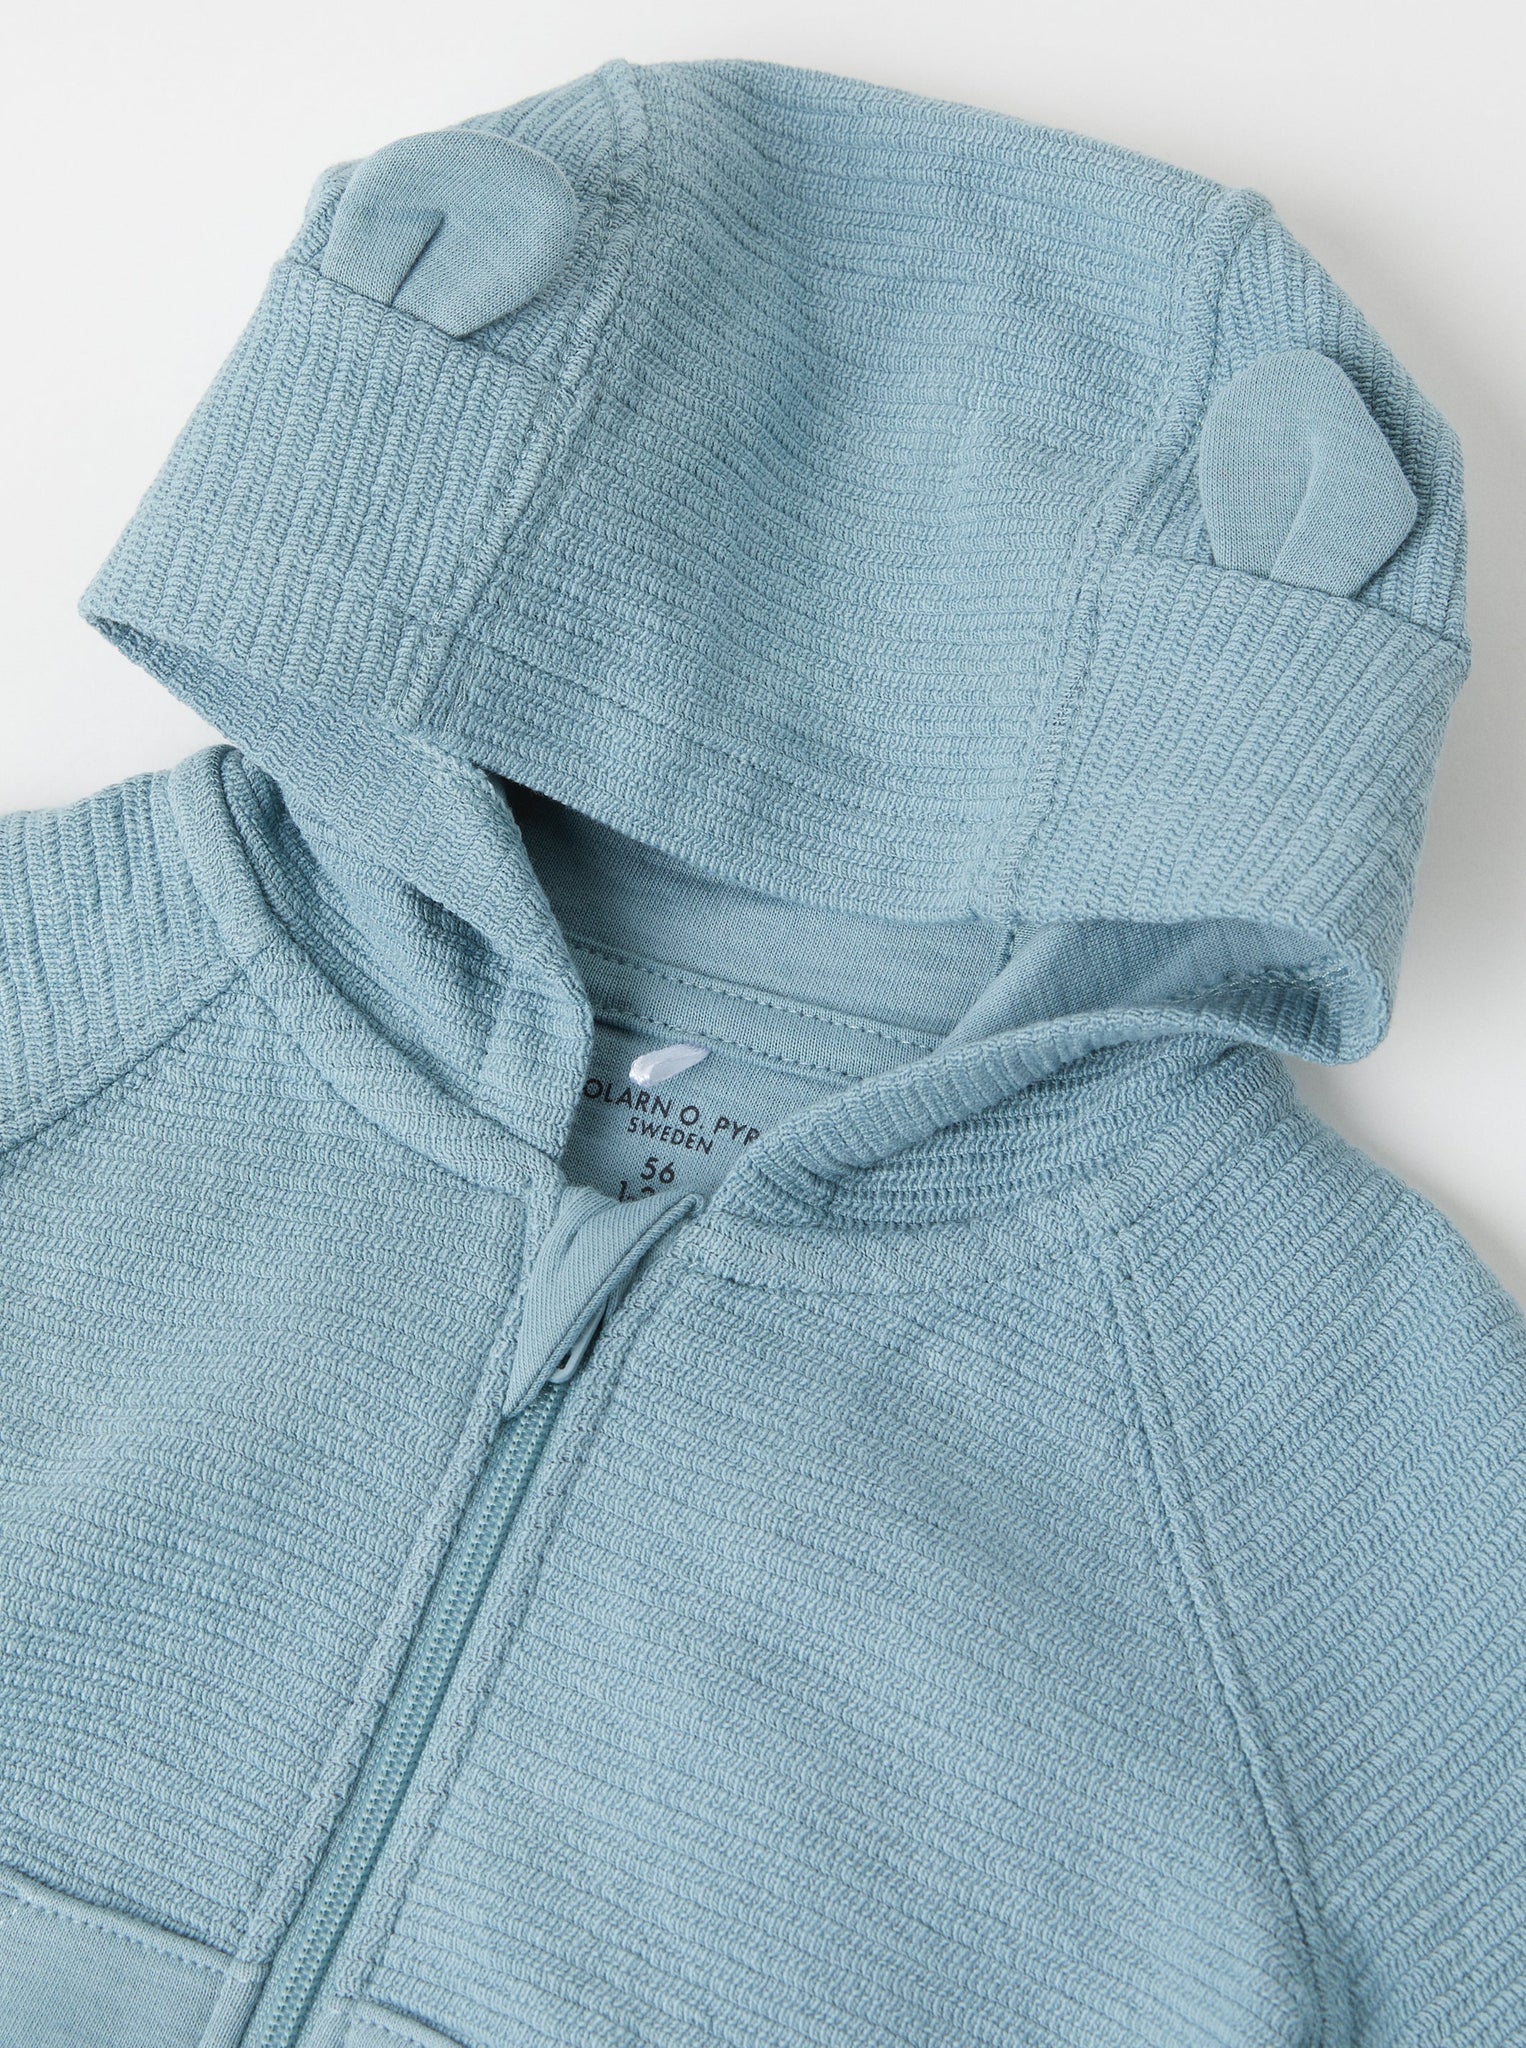 Organic Cotton Blue Baby Hoodie from the Polarn O. Pyret babywear collection. Nordic kids clothes made from sustainable sources.